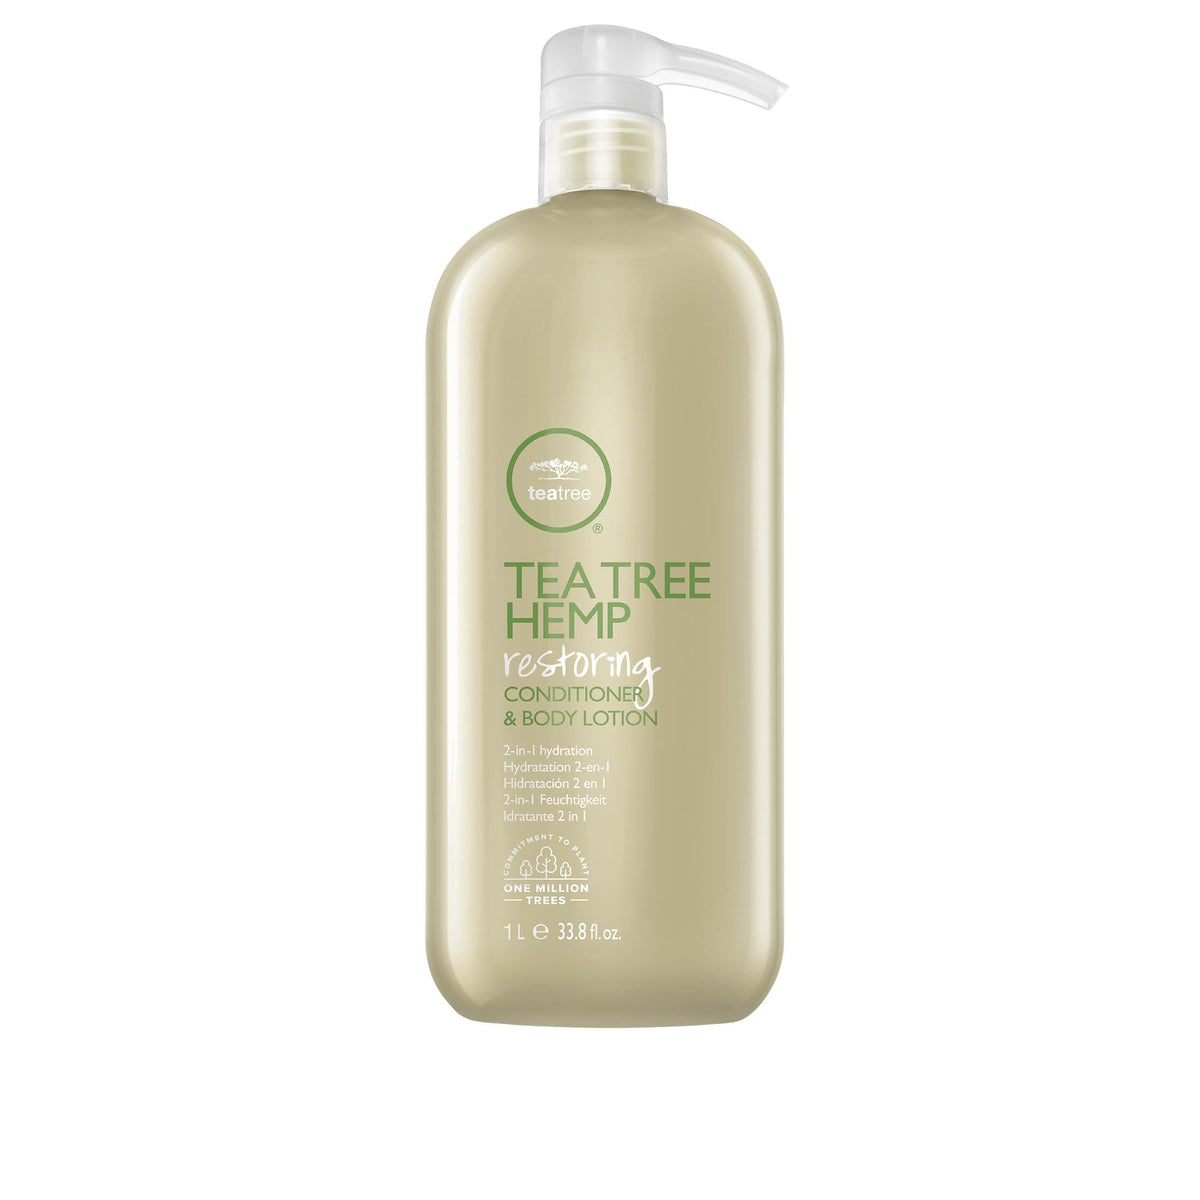 Tea Tree Hemp Restoring Conditioner & Body Lotion - 1L - by Paul Mitchell |ProCare Outlet|